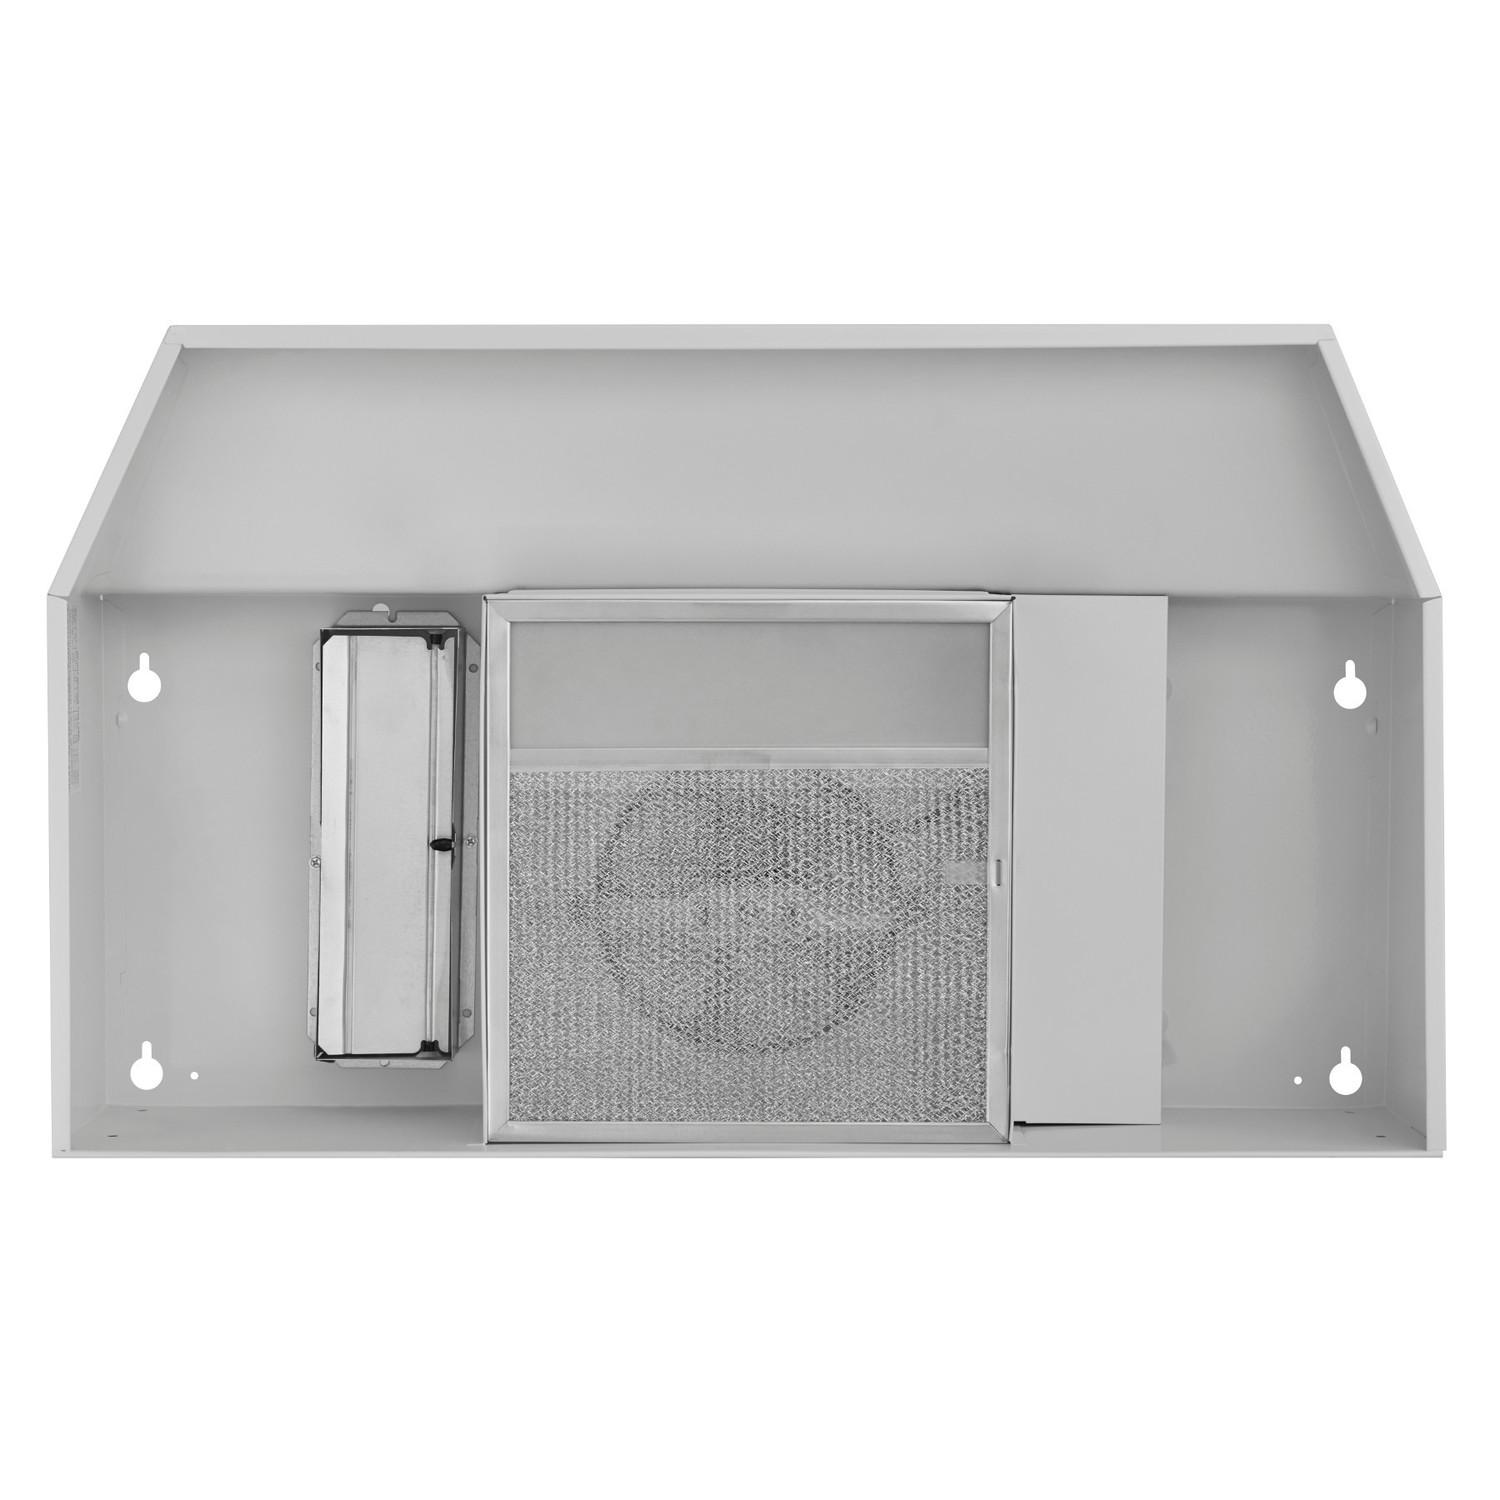 Broan® 30-Inch Ducted Under-Cabinet Range Hood w/ Easy Install System, 210 Max Blower CFM, White